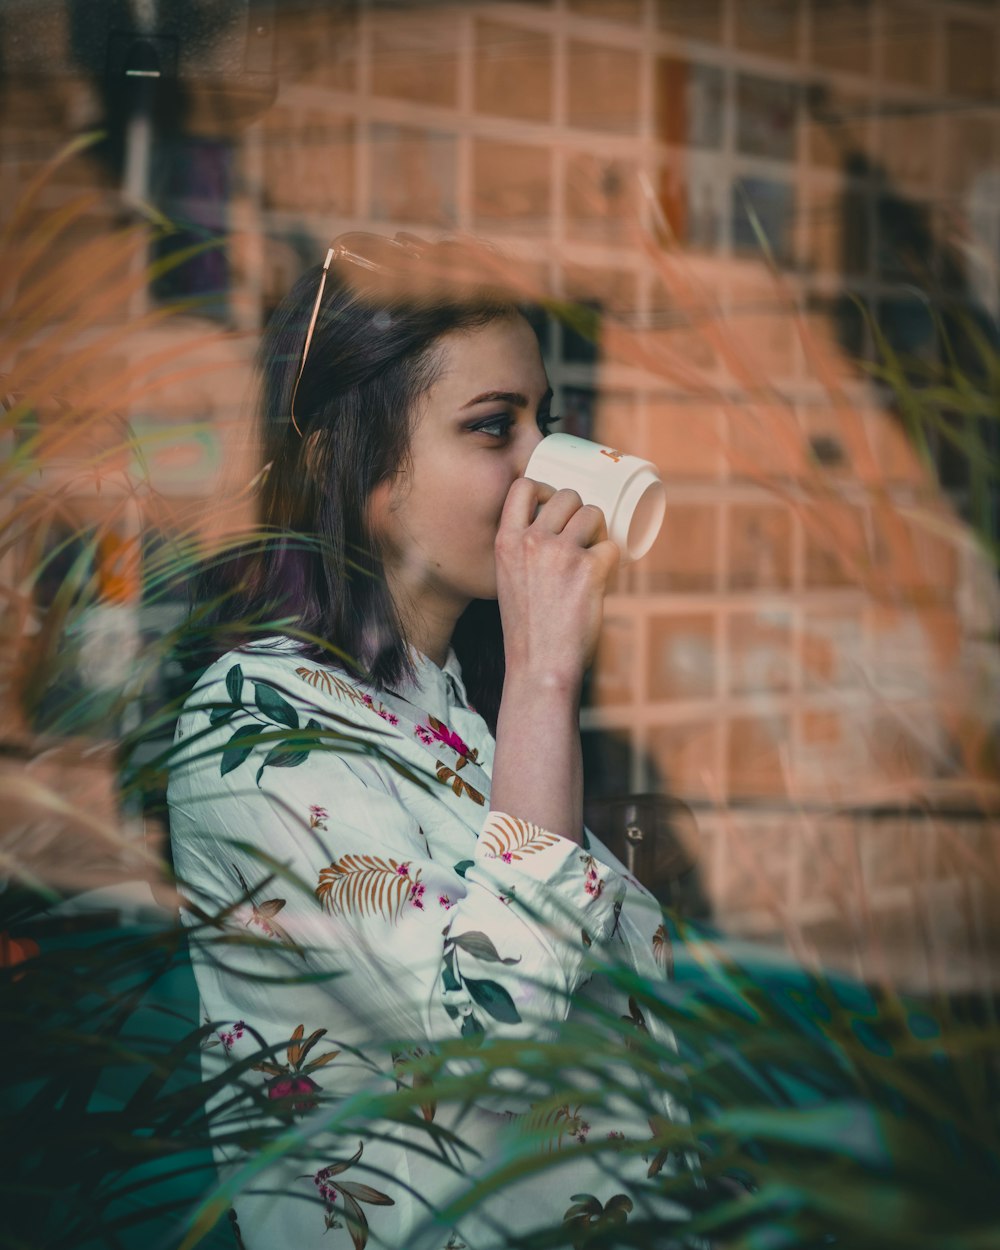 woman in white and red floral shirt drinking from white ceramic mug